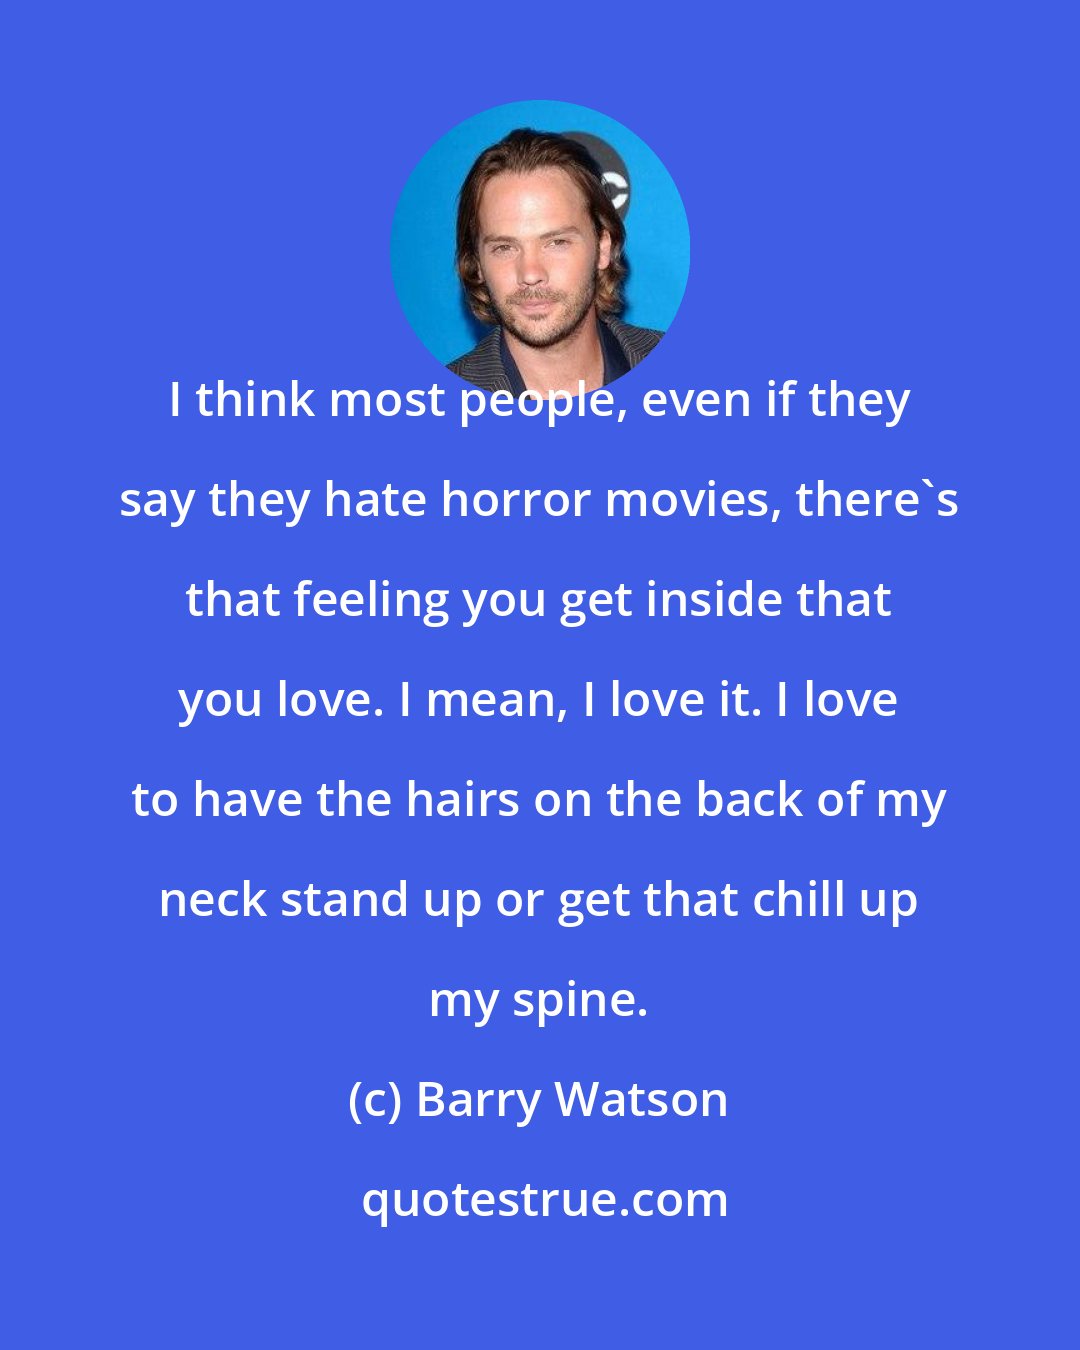 Barry Watson: I think most people, even if they say they hate horror movies, there's that feeling you get inside that you love. I mean, I love it. I love to have the hairs on the back of my neck stand up or get that chill up my spine.